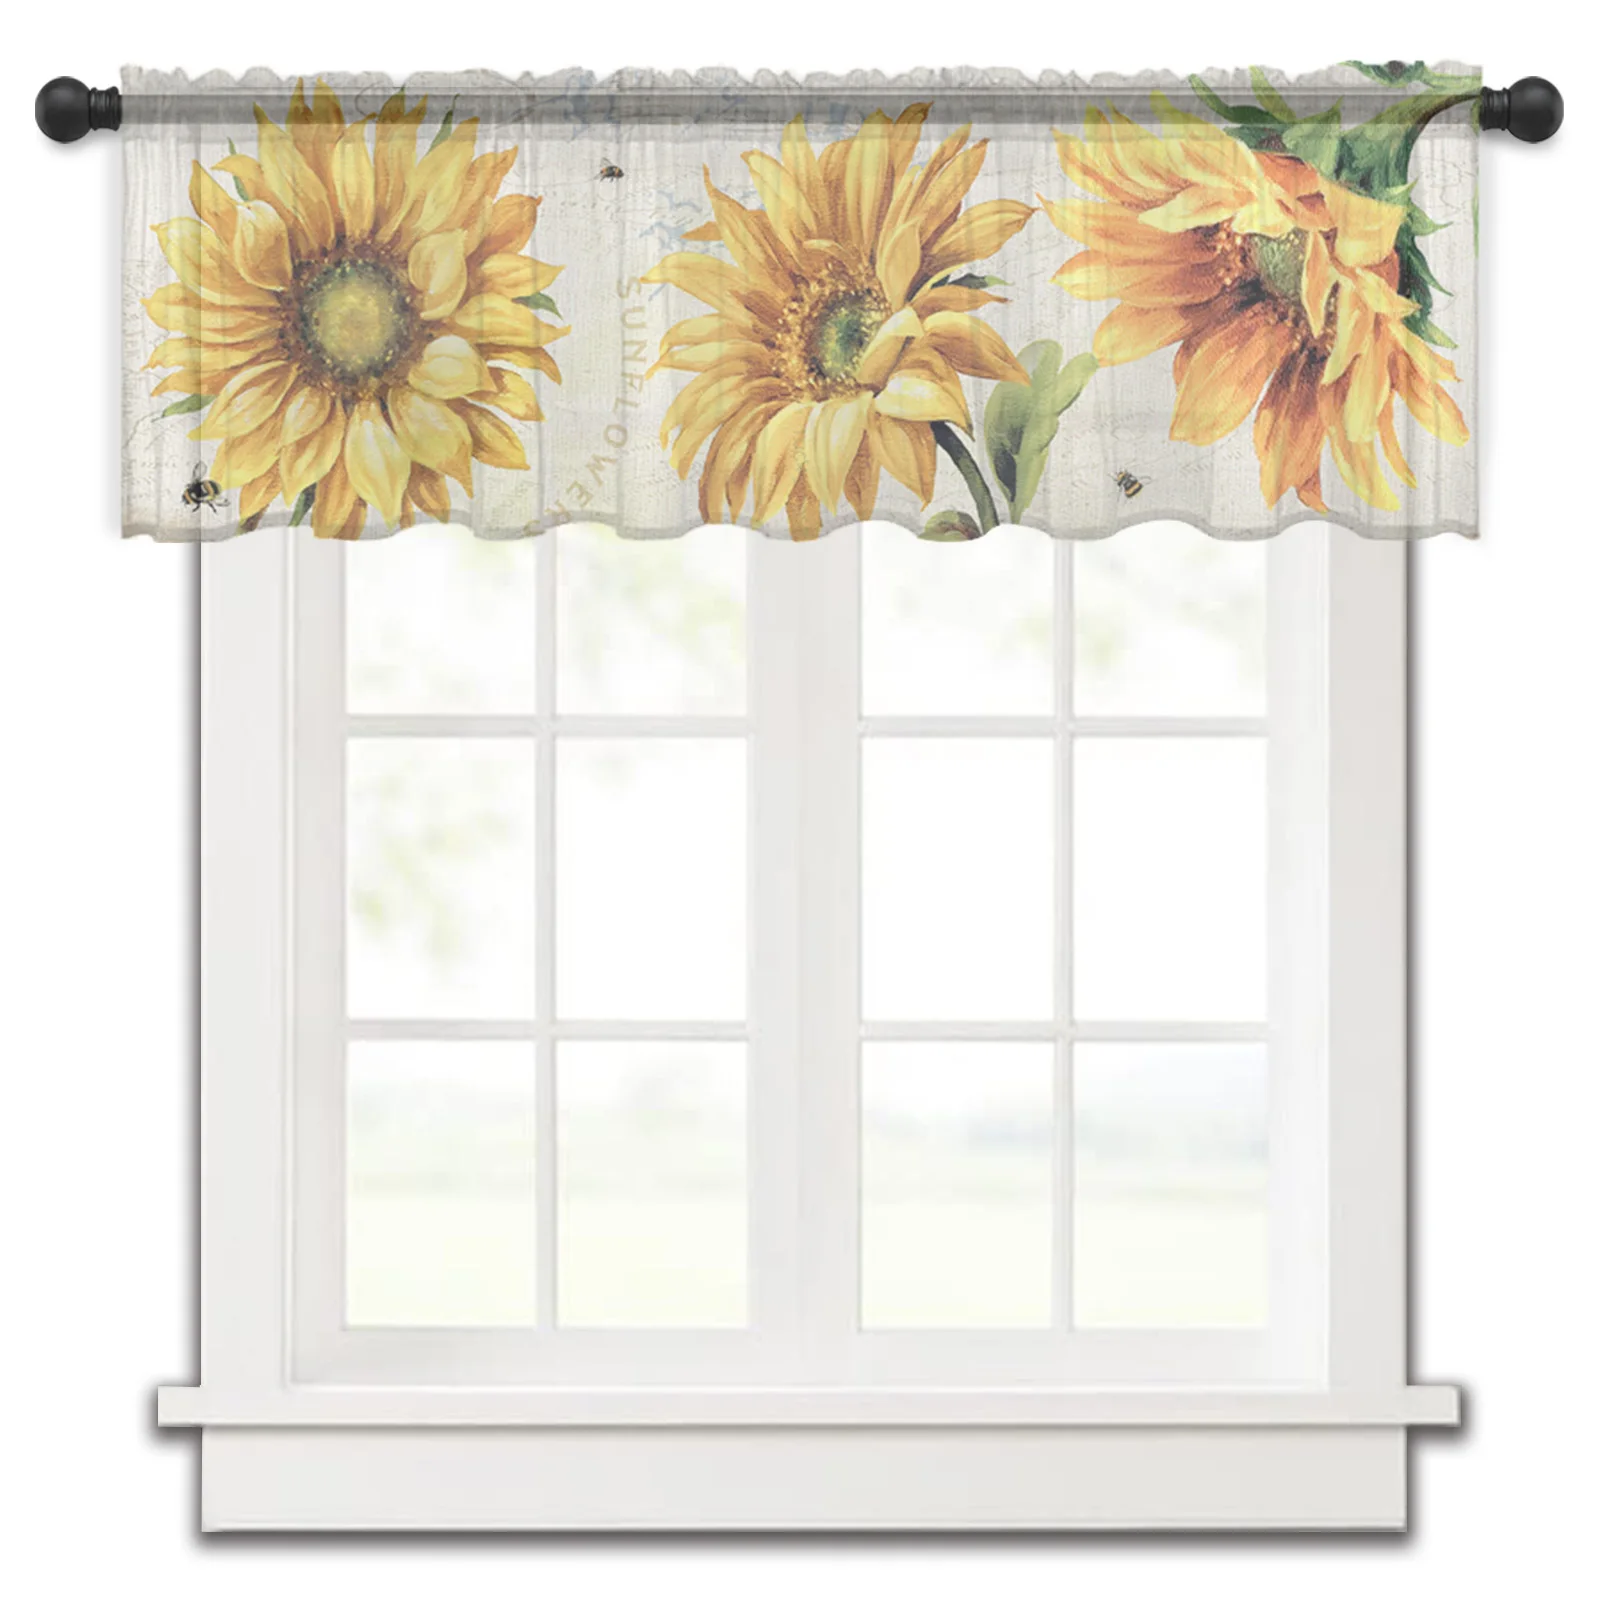 

Vintage Sunflower Bee Tulle Kitchen Small Window Curtain Valance Sheer Short Curtain Bedroom Living Room Home Decor Voile Drapes